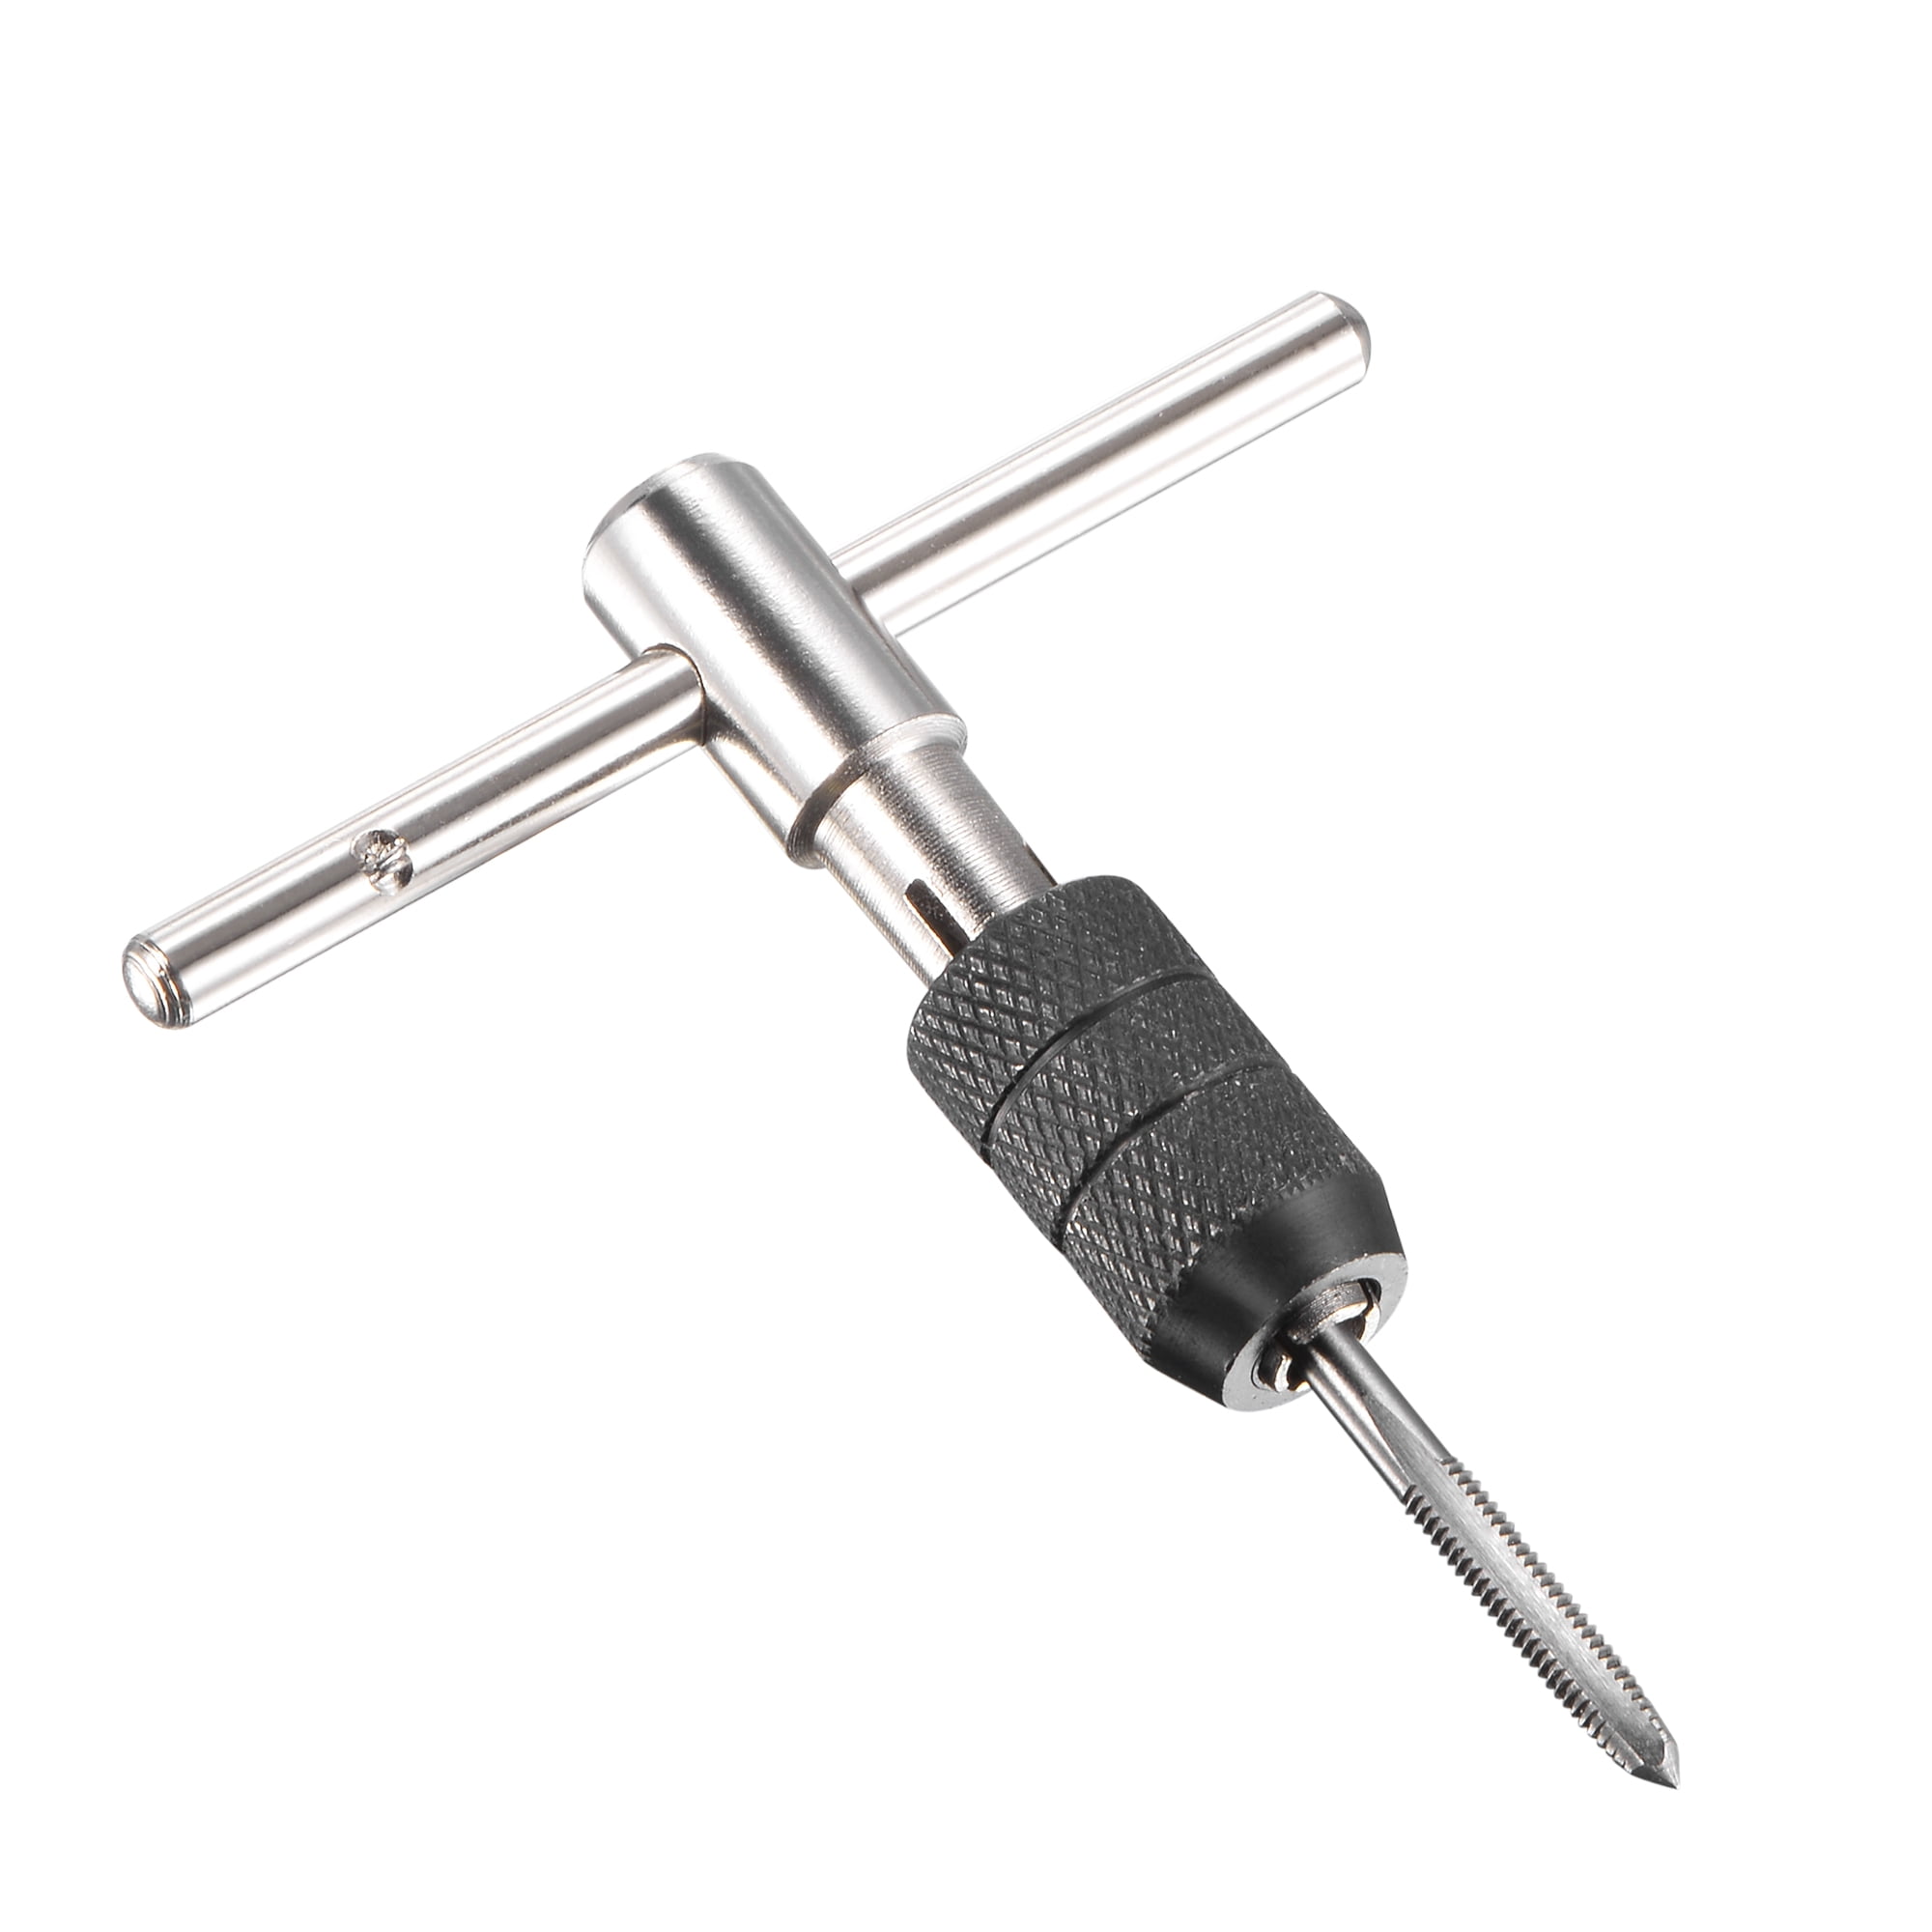 HSS Screw Treading Tool for Cutting Internal Threads Adjustable T-Handle Tap Ratchet Holder Wrench with Metric M3 M4 M5 M6 M8 Taps Drill Bits Bestgle T-tap Wrench Set 